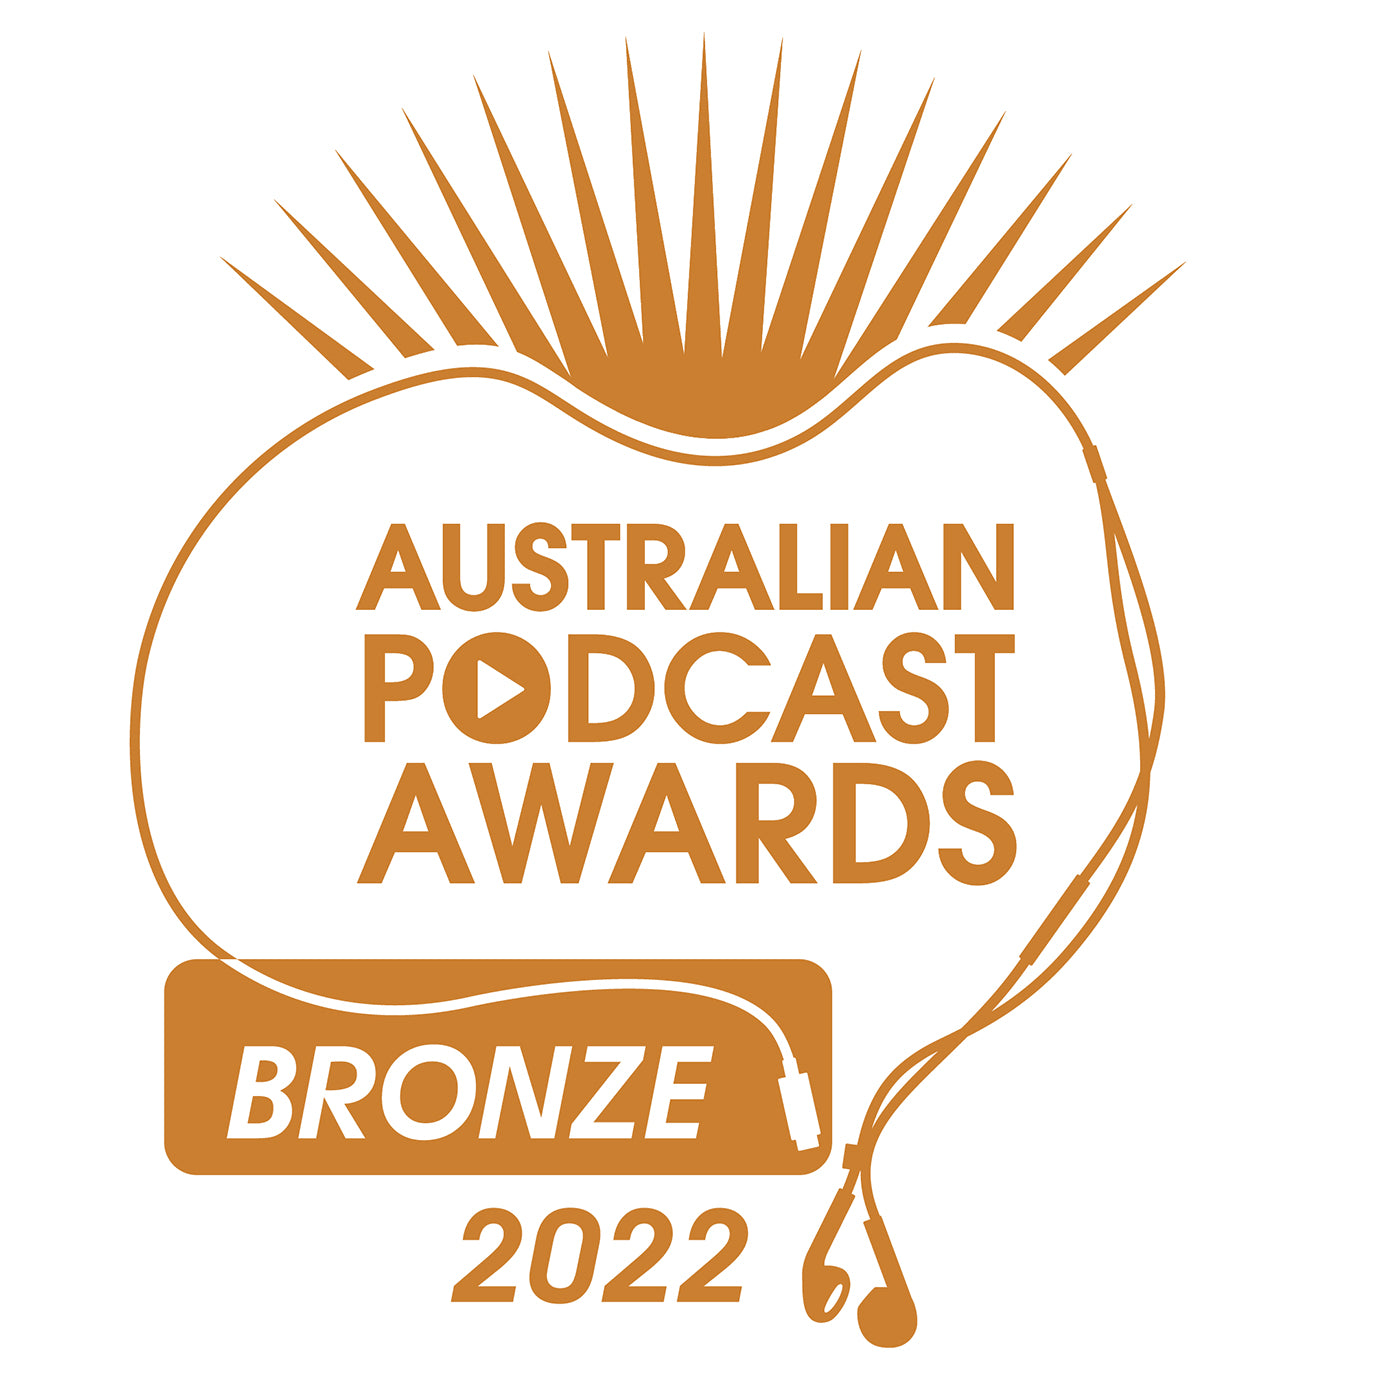 Talking Pointes: Bronze Medal for Best Arts & Culture Podcast